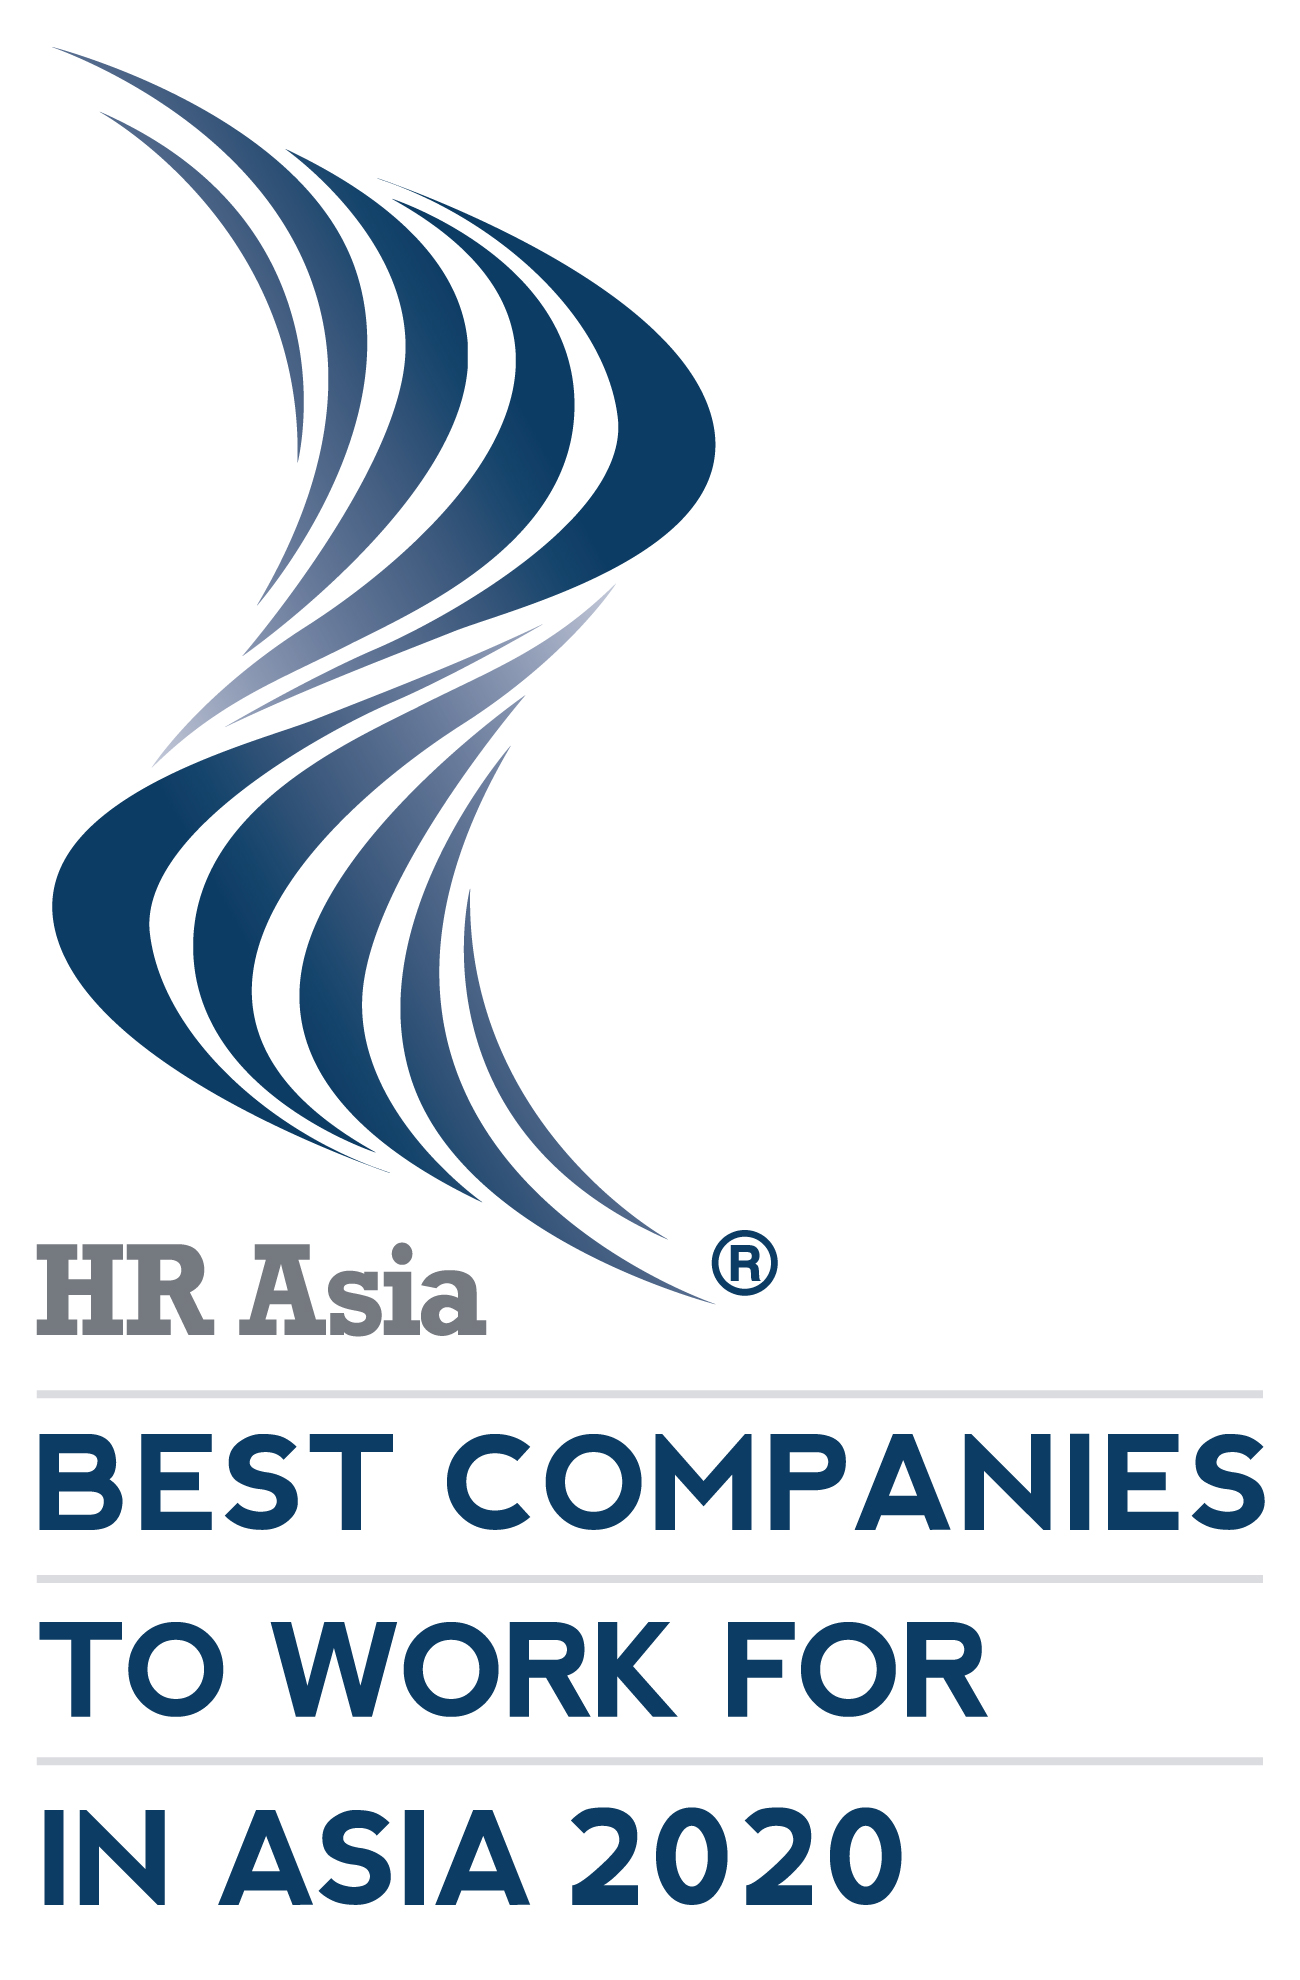 HR Asia Best Companies to Work for in Asia 2020 Logo_HR Asia_large